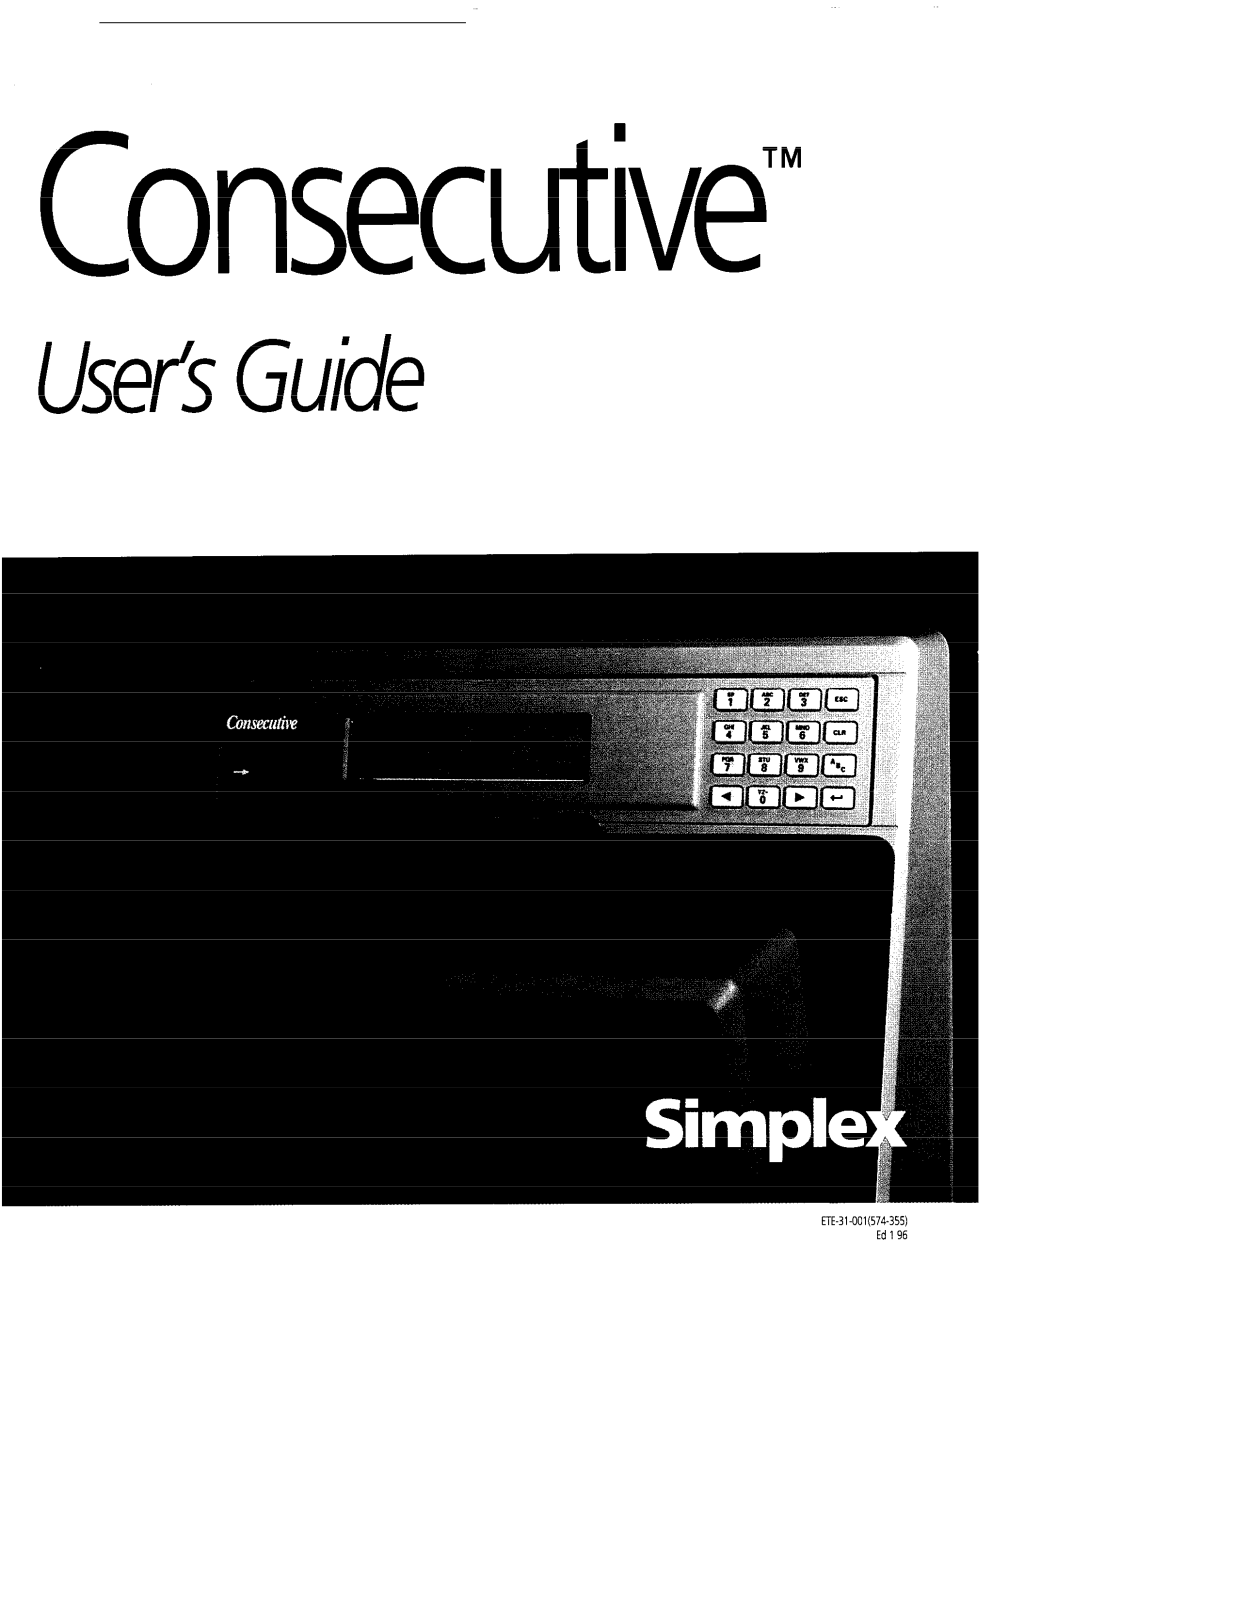 BC Time Recorder Simplex Consecutive User's Guide